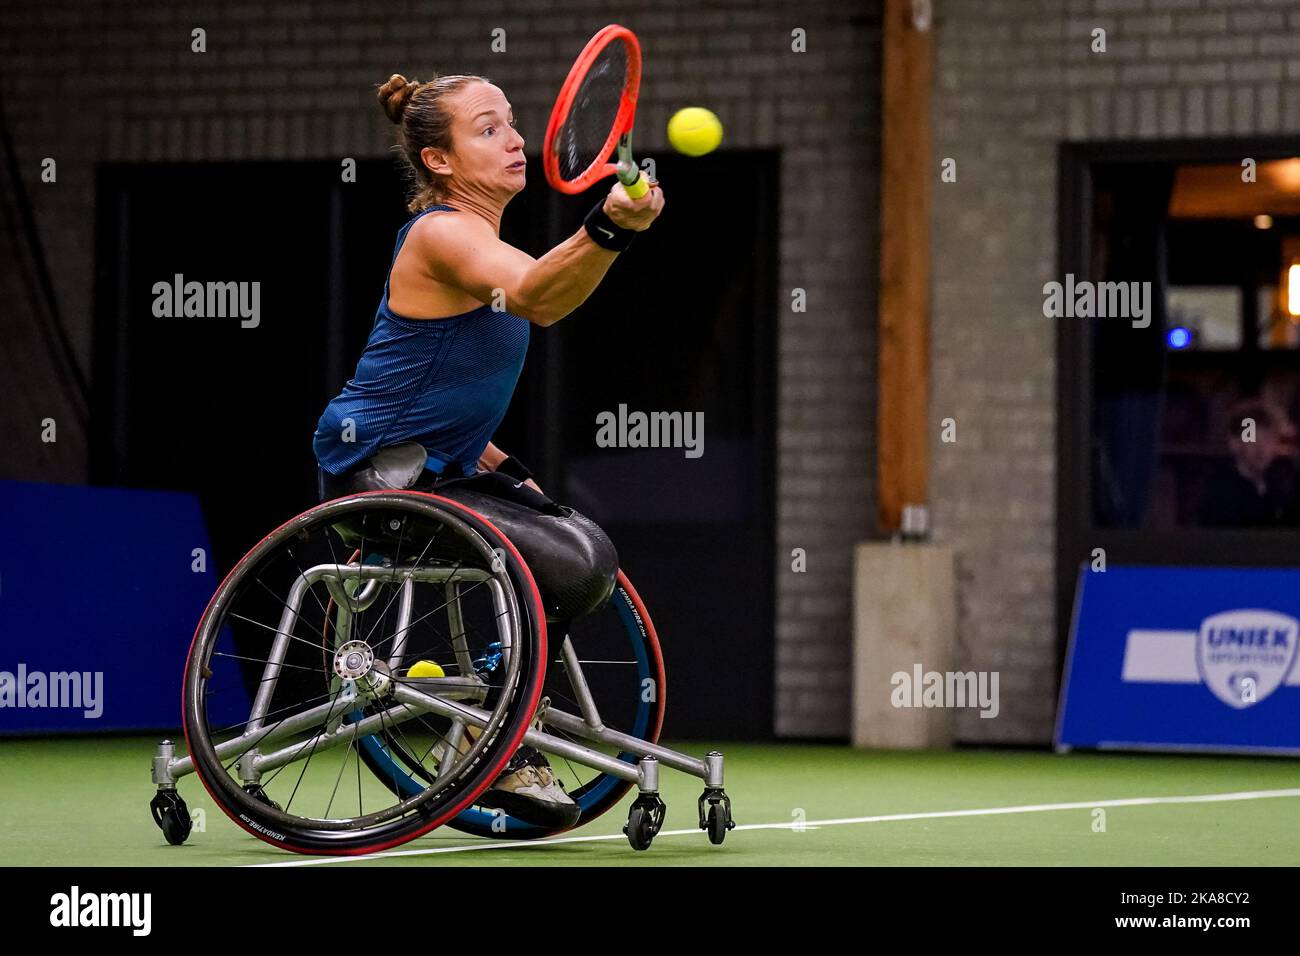 OSS, NETHERLANDS - NOVEMBER 1: Jiske Griffioen of the Netherlands plays a forehand in her match against Yui Kamiji of Japan during Day 3 of the 2022 ITF Wheelchair Tennis Masters at Sportcentrum de Rusheuvel on November 1, 2022 in Oss, Netherlands (Photo by Rene Nijhuis/Orange Pictures) Stock Photo